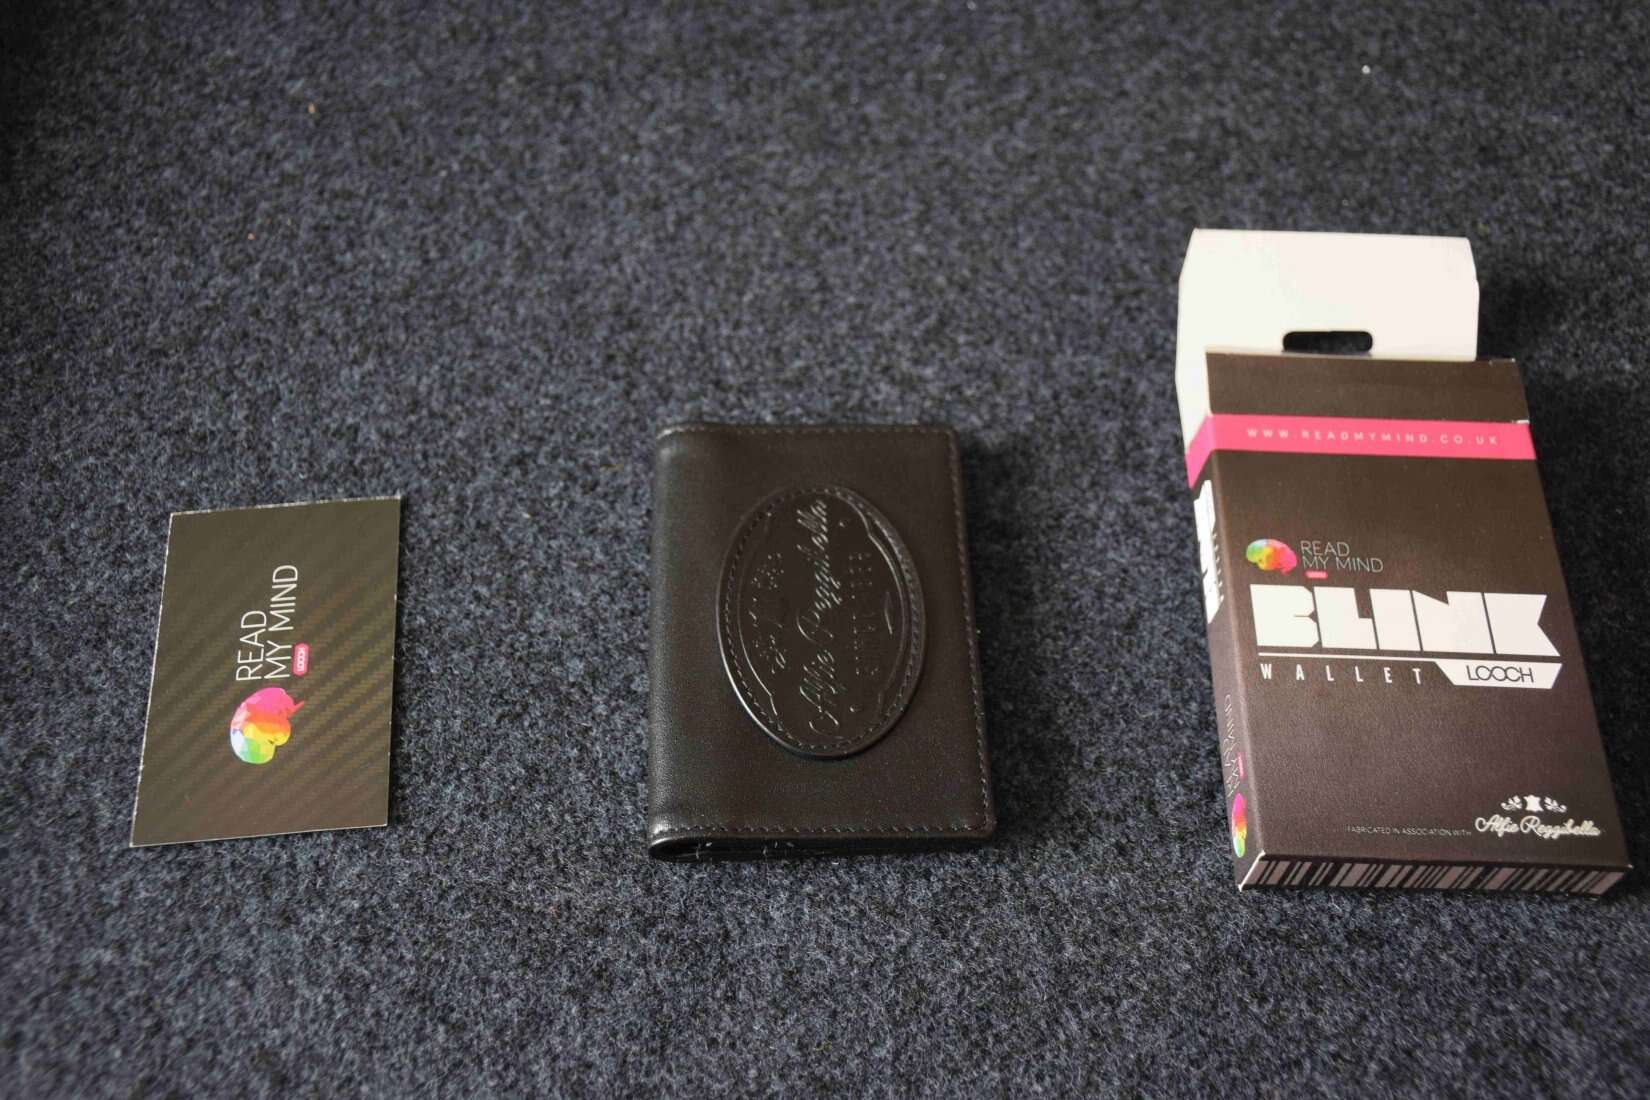 Blink by Looch wallet and box